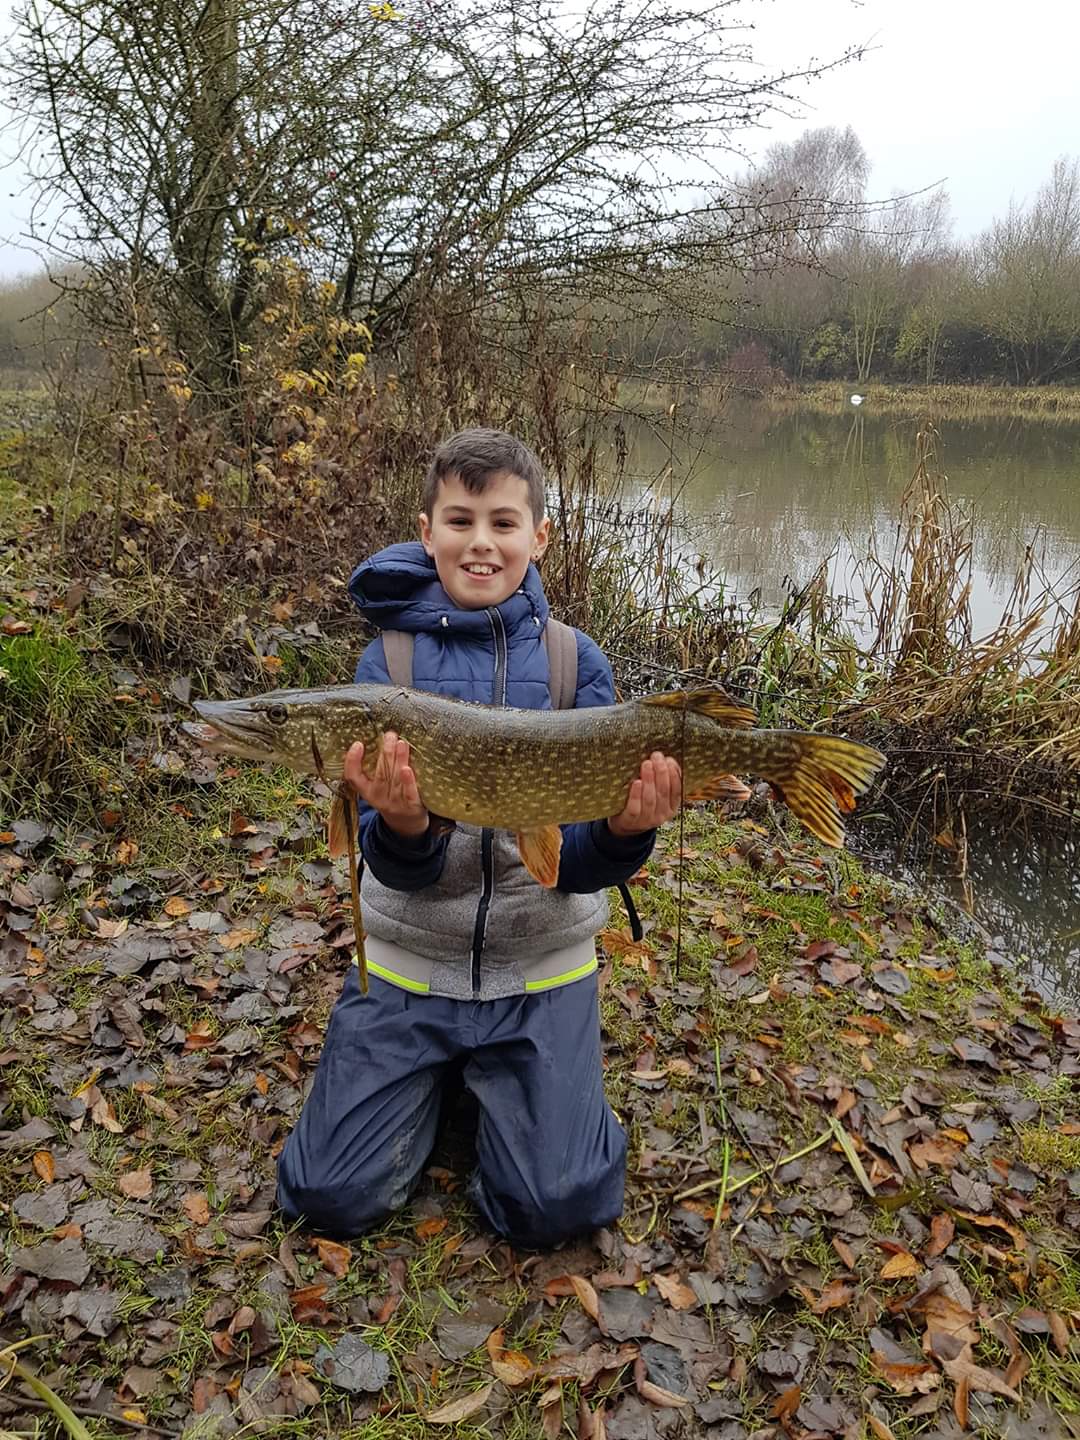 Cracking pike - well done